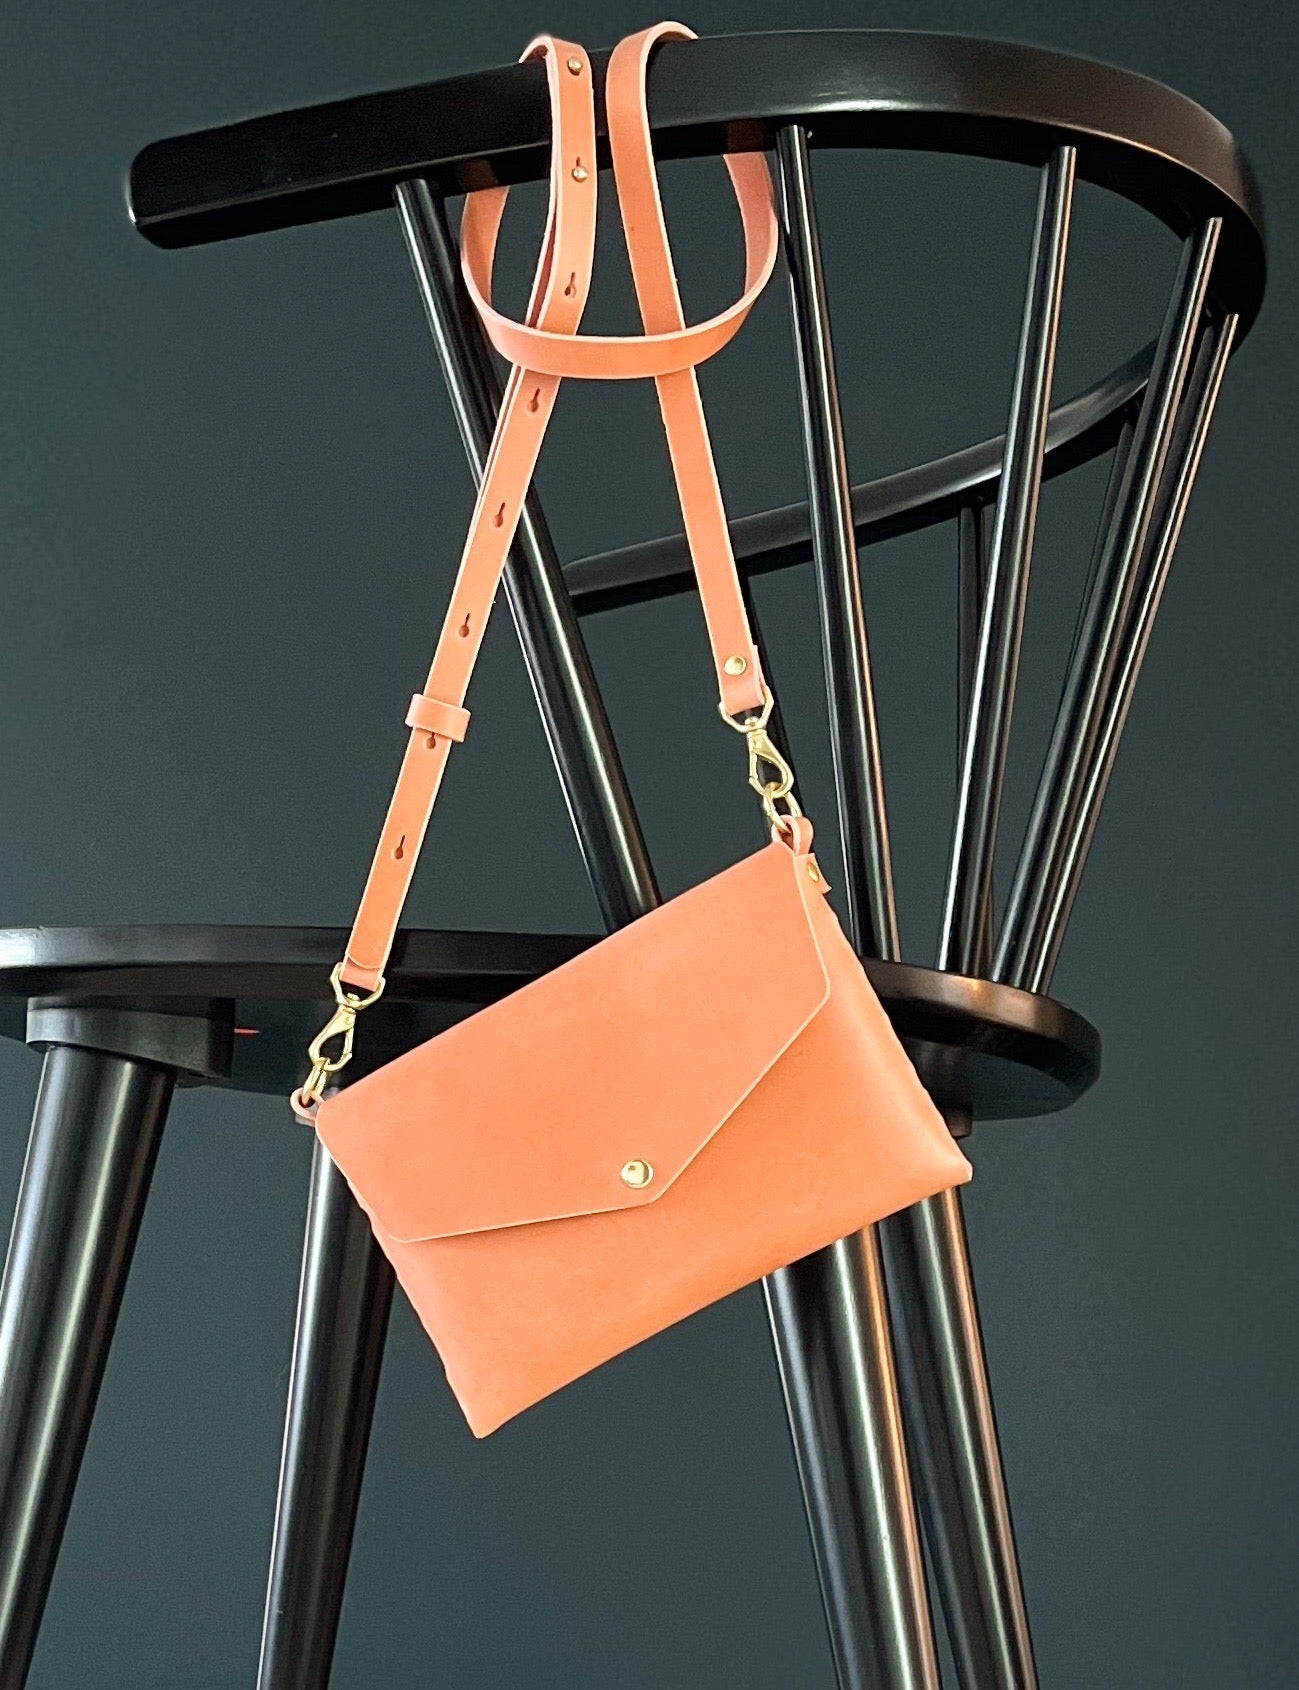 modjūl's mini leather bag in pink hanging on the back of a chair. A rectangular-shaped bag with long straps, handmade in Canada using quality Italian leather and brass hardware.